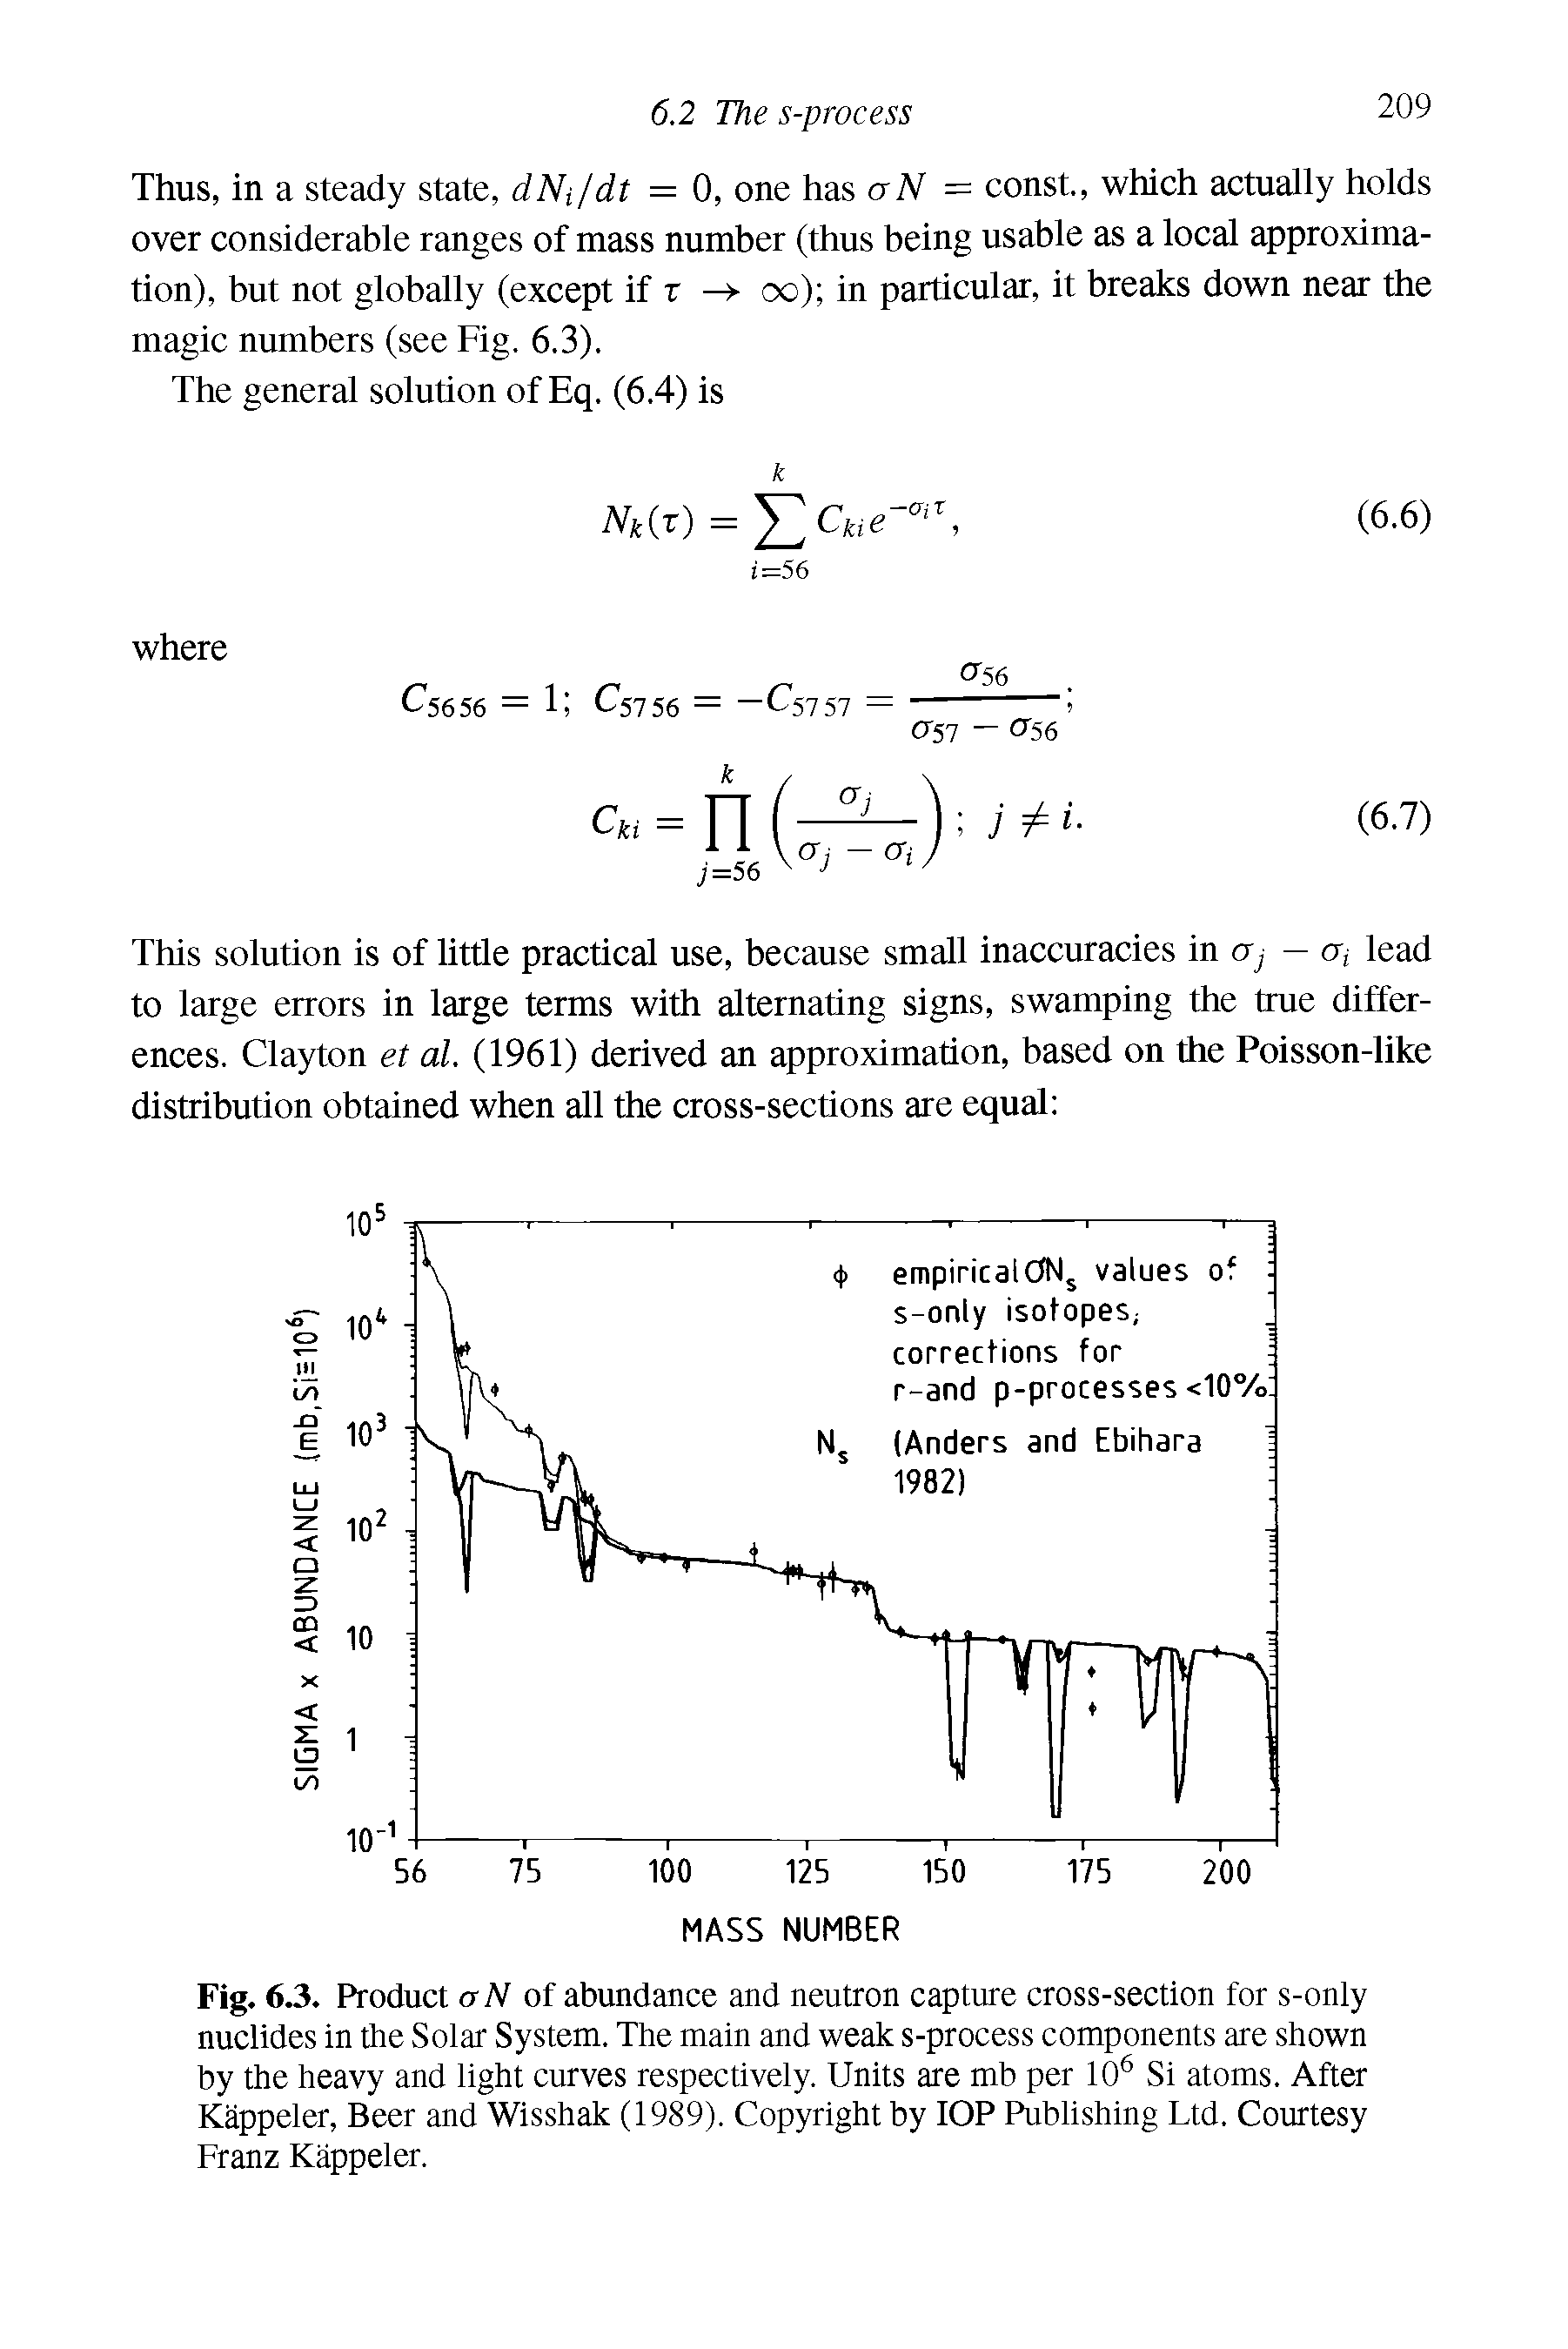 Fig. 6.3. Product aN of abundance and neutron capture cross-section for s-only nuclides in the Solar System. The main and weak s-process components are shown by the heavy and light curves respectively. Units are mb per 106 Si atoms. After Kappeler, Beer and Wisshak (1989). Copyright by IOP Publishing Ltd. Courtesy Franz Kappeler.